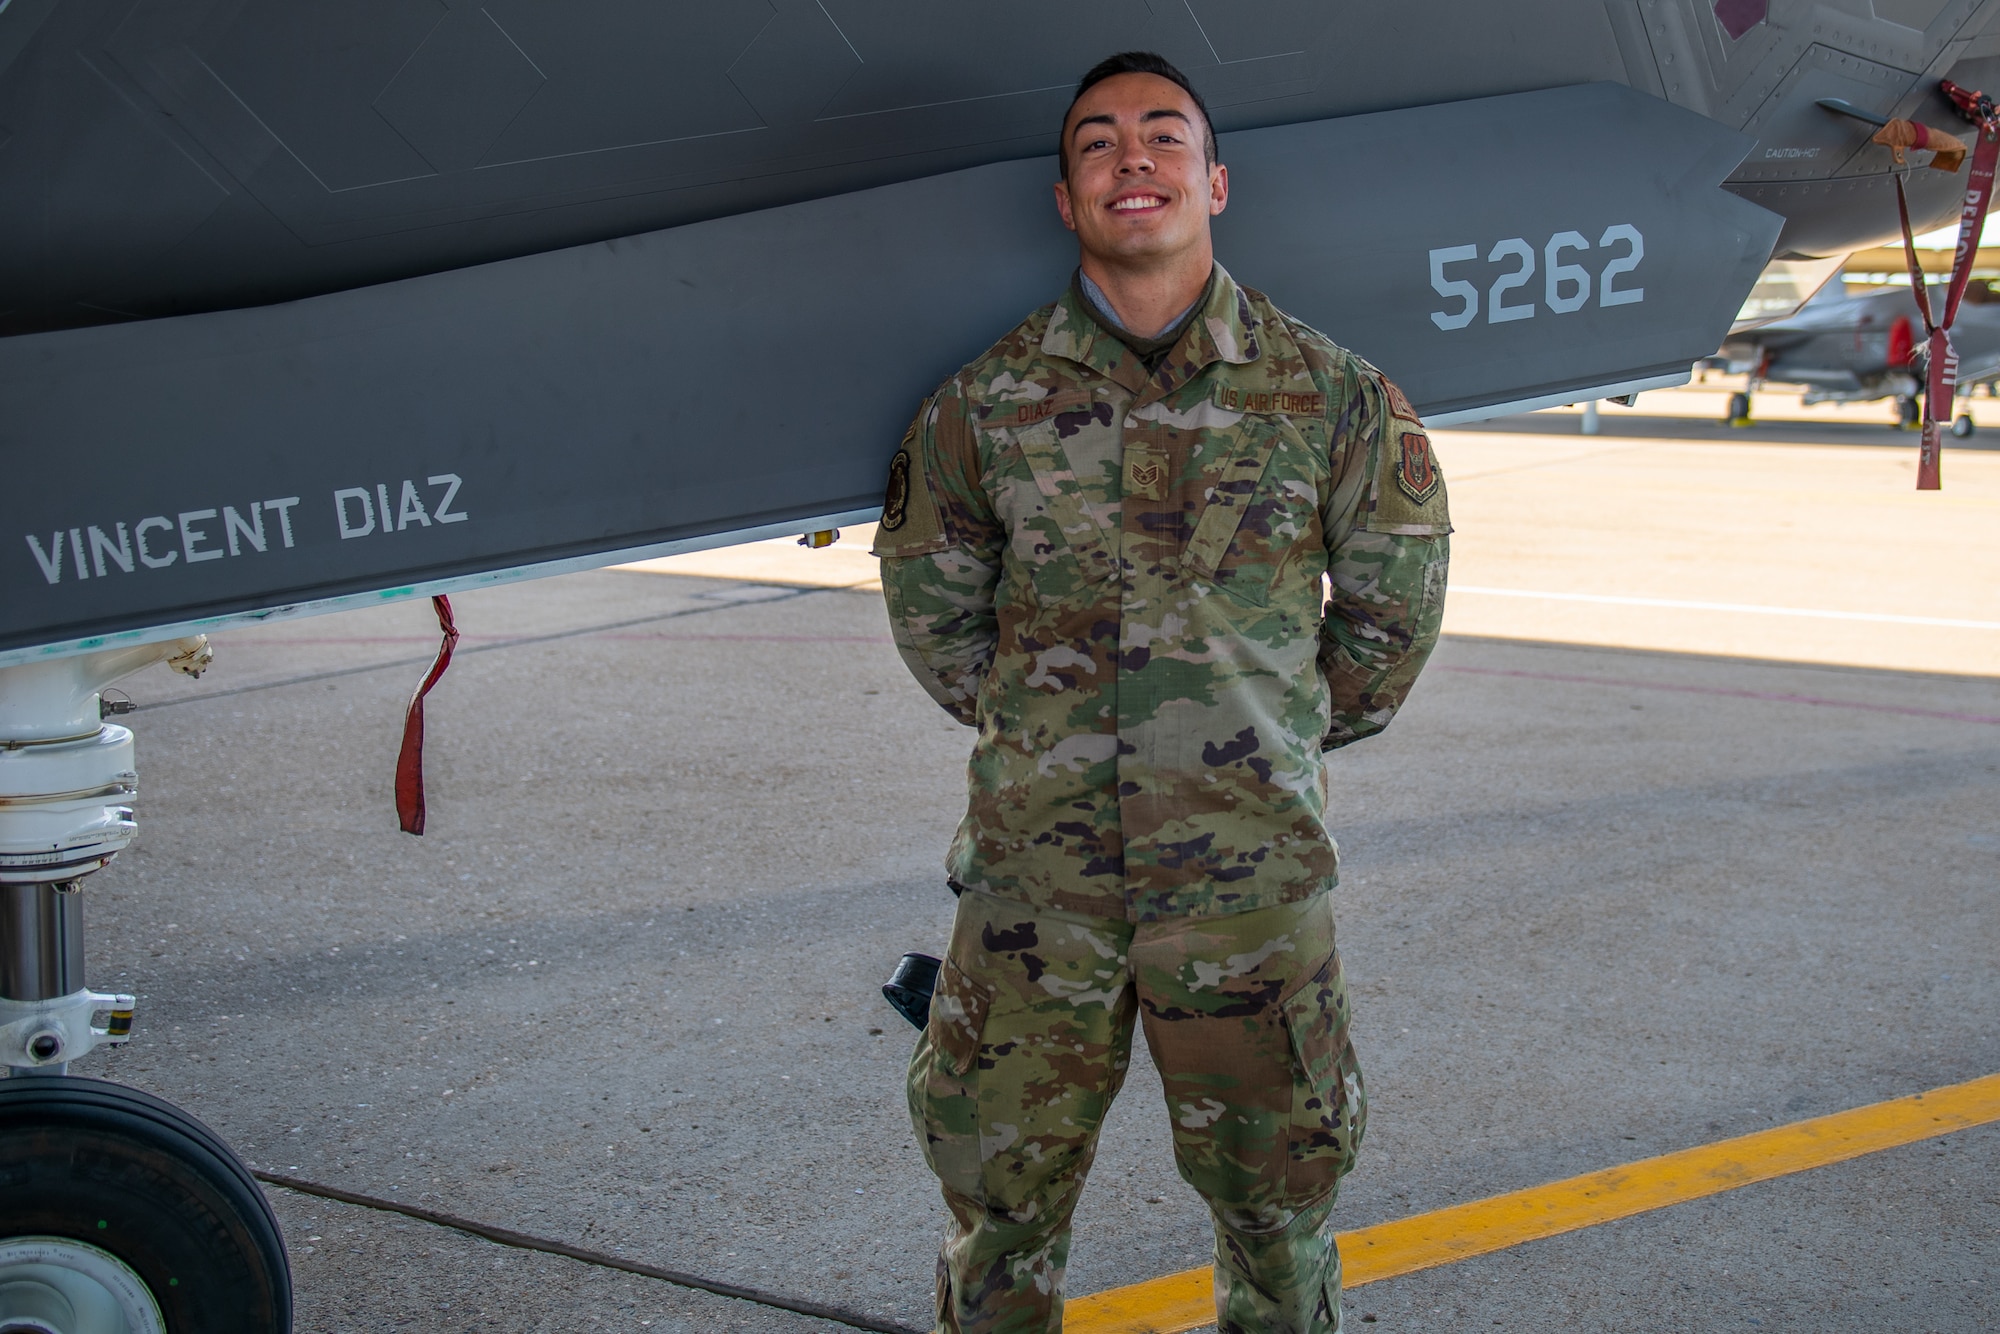 Staff Sgt. Vincent Diaz, Air Force Reserve crew chief with the 419th Aircraft Maintenance Squadron at Hill Air Force Base, Utah.